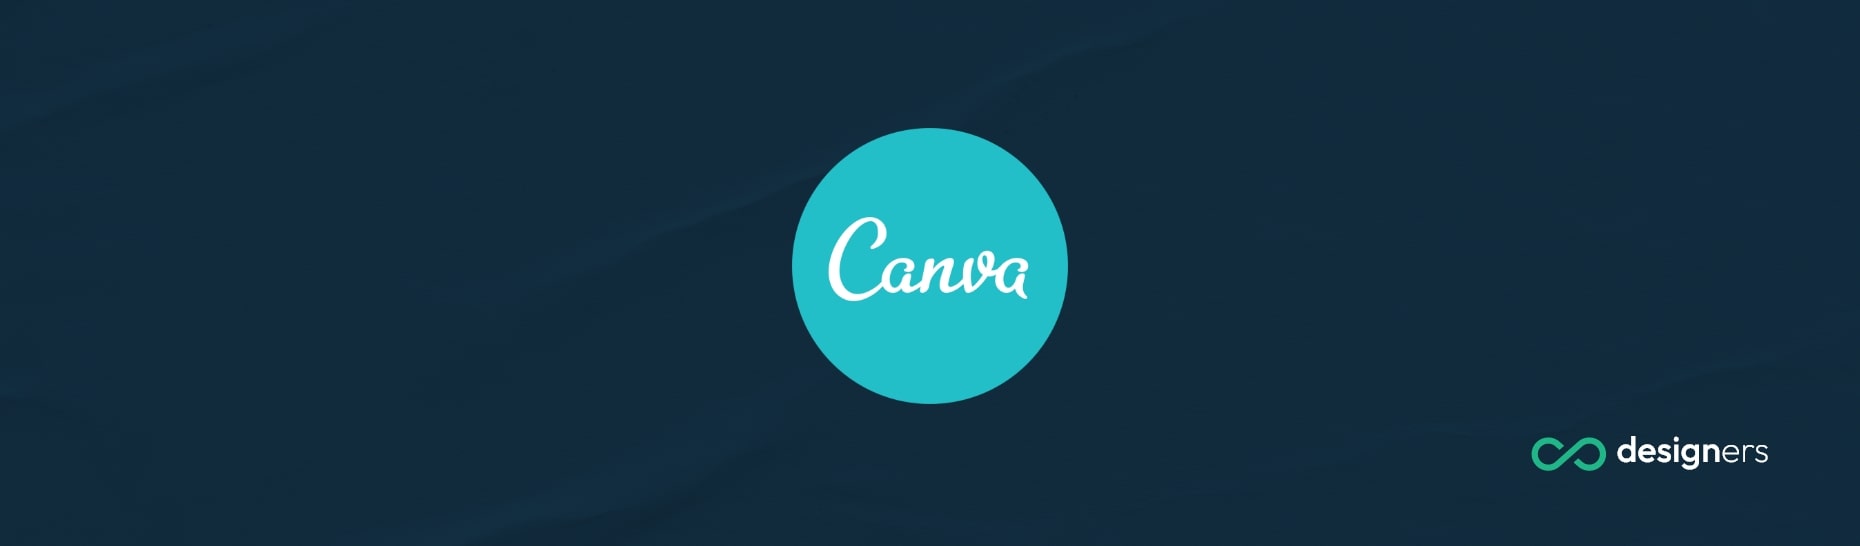 Does Canva Have LinkedIn Templates?